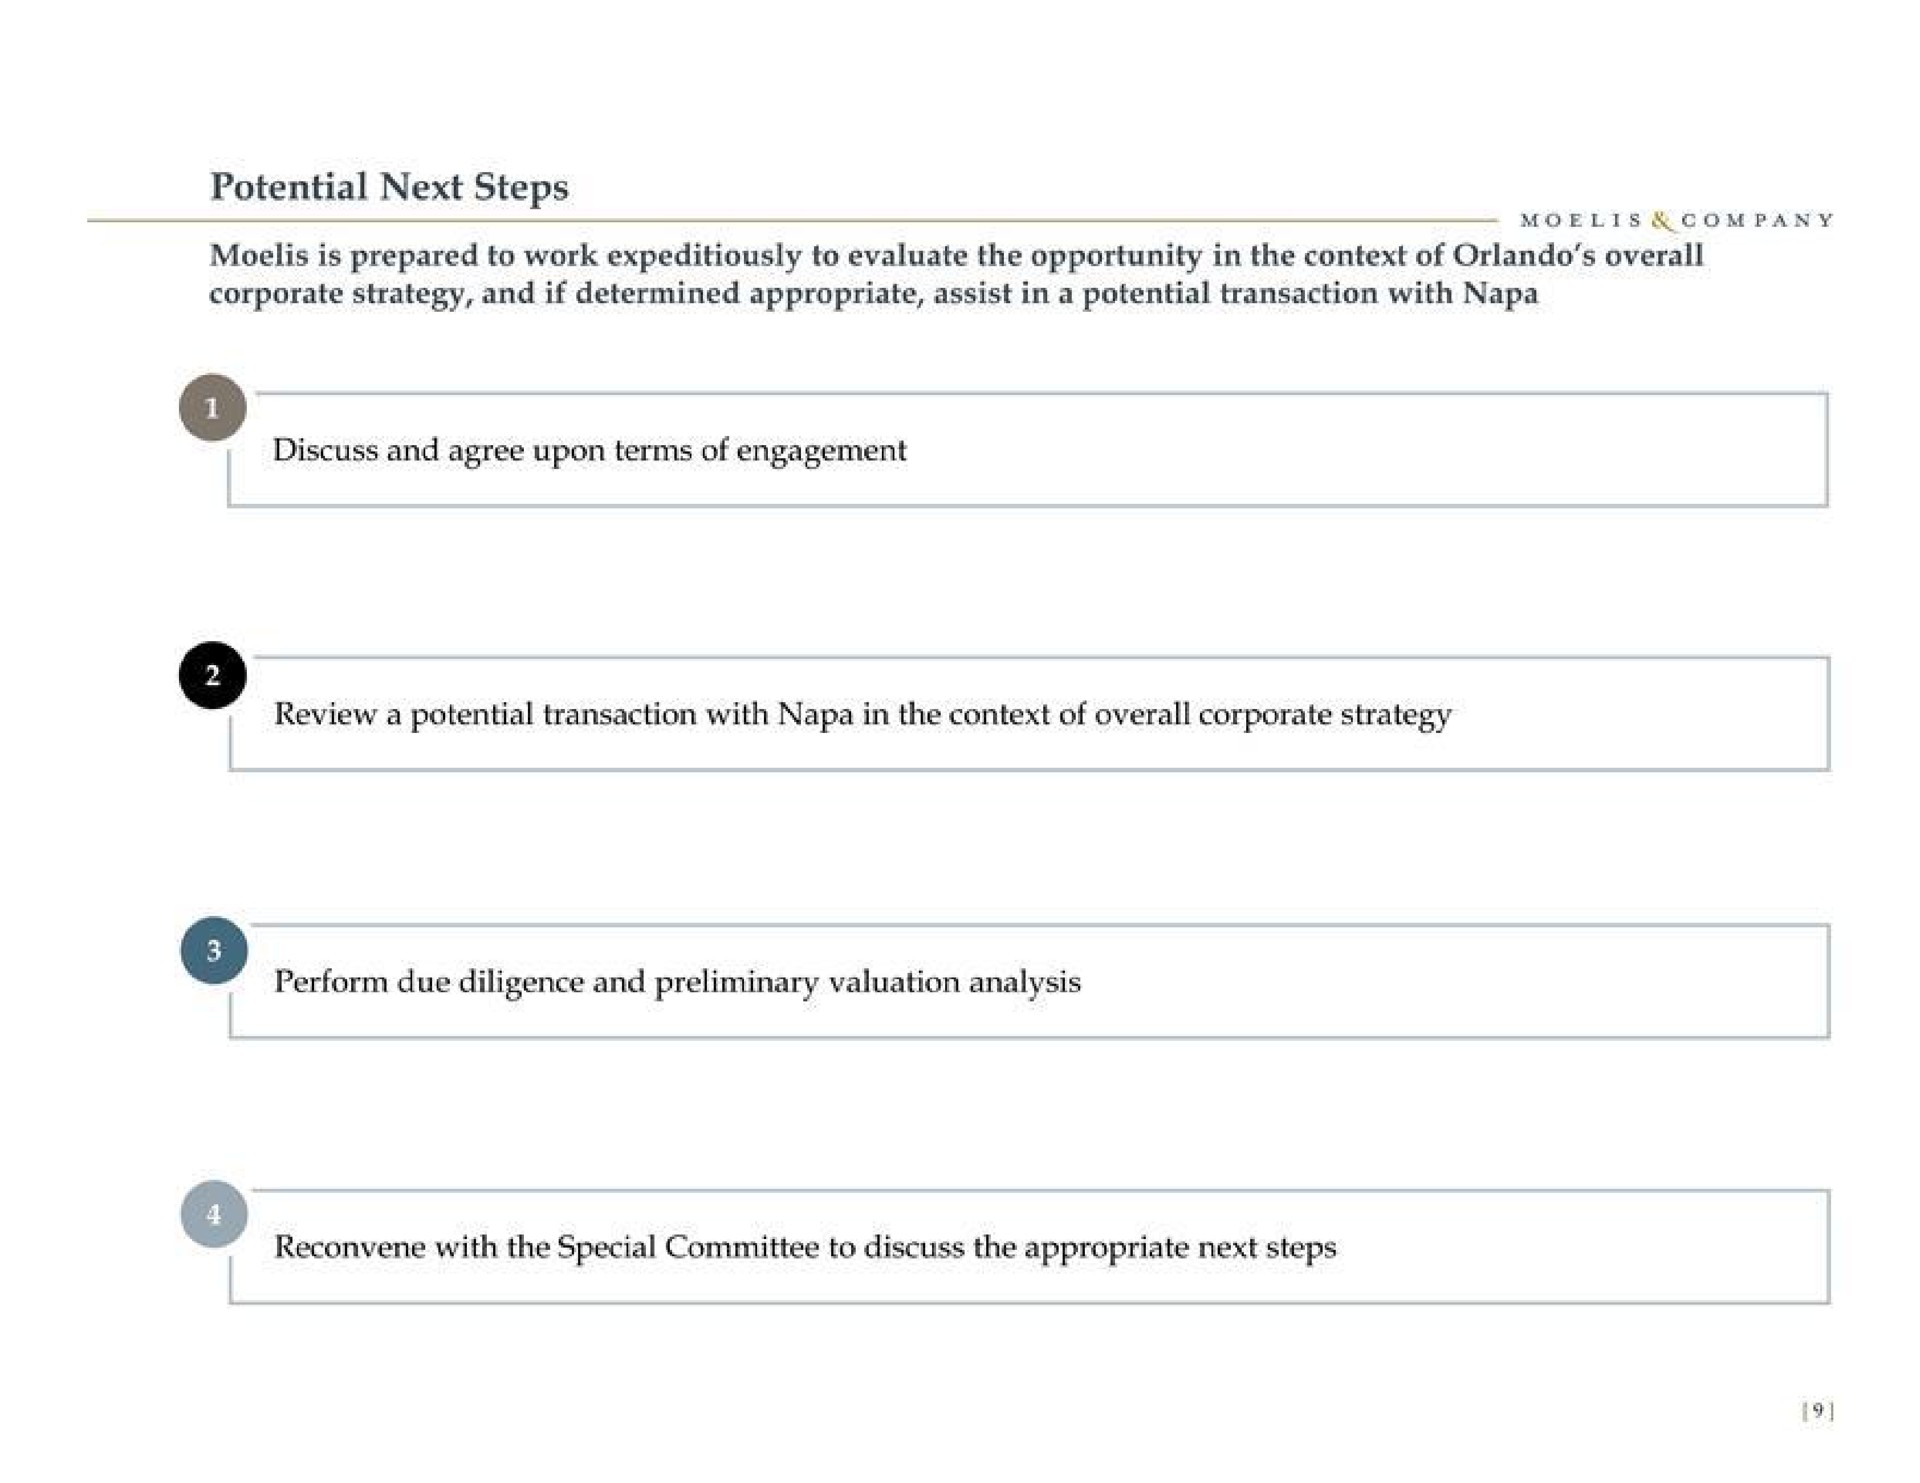 potential next steps discuss and agree upon terms of engagement review a potential transaction with napa in the context of overall corporate strategy perform due diligence and preliminary valuation analysis | Moelis & Company